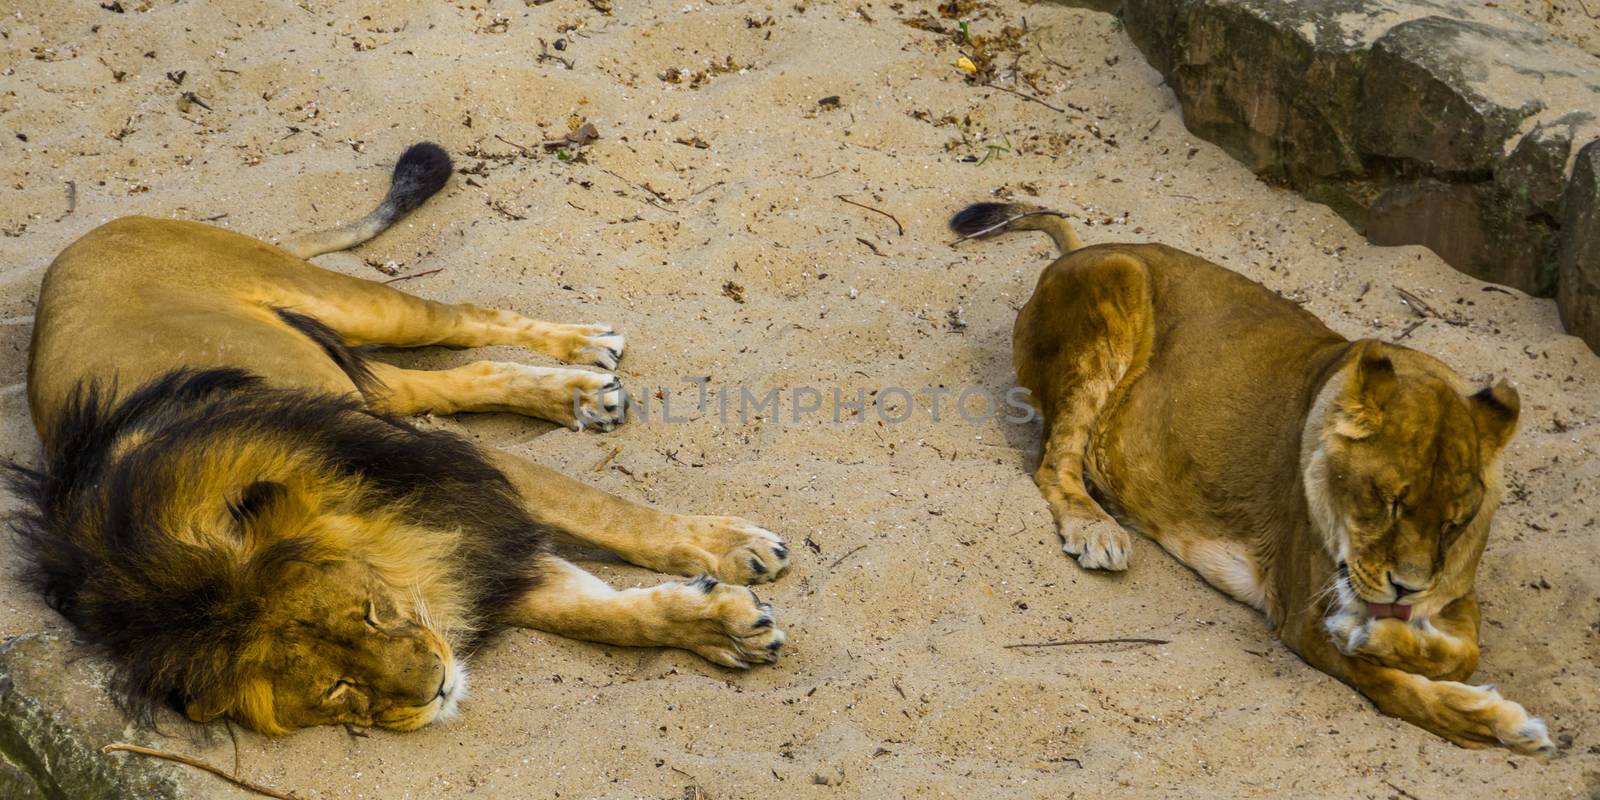 Male and female lion together, Male lion sleeping, lioness licking her paw, vulnerable animal specie from Africa by charlottebleijenberg